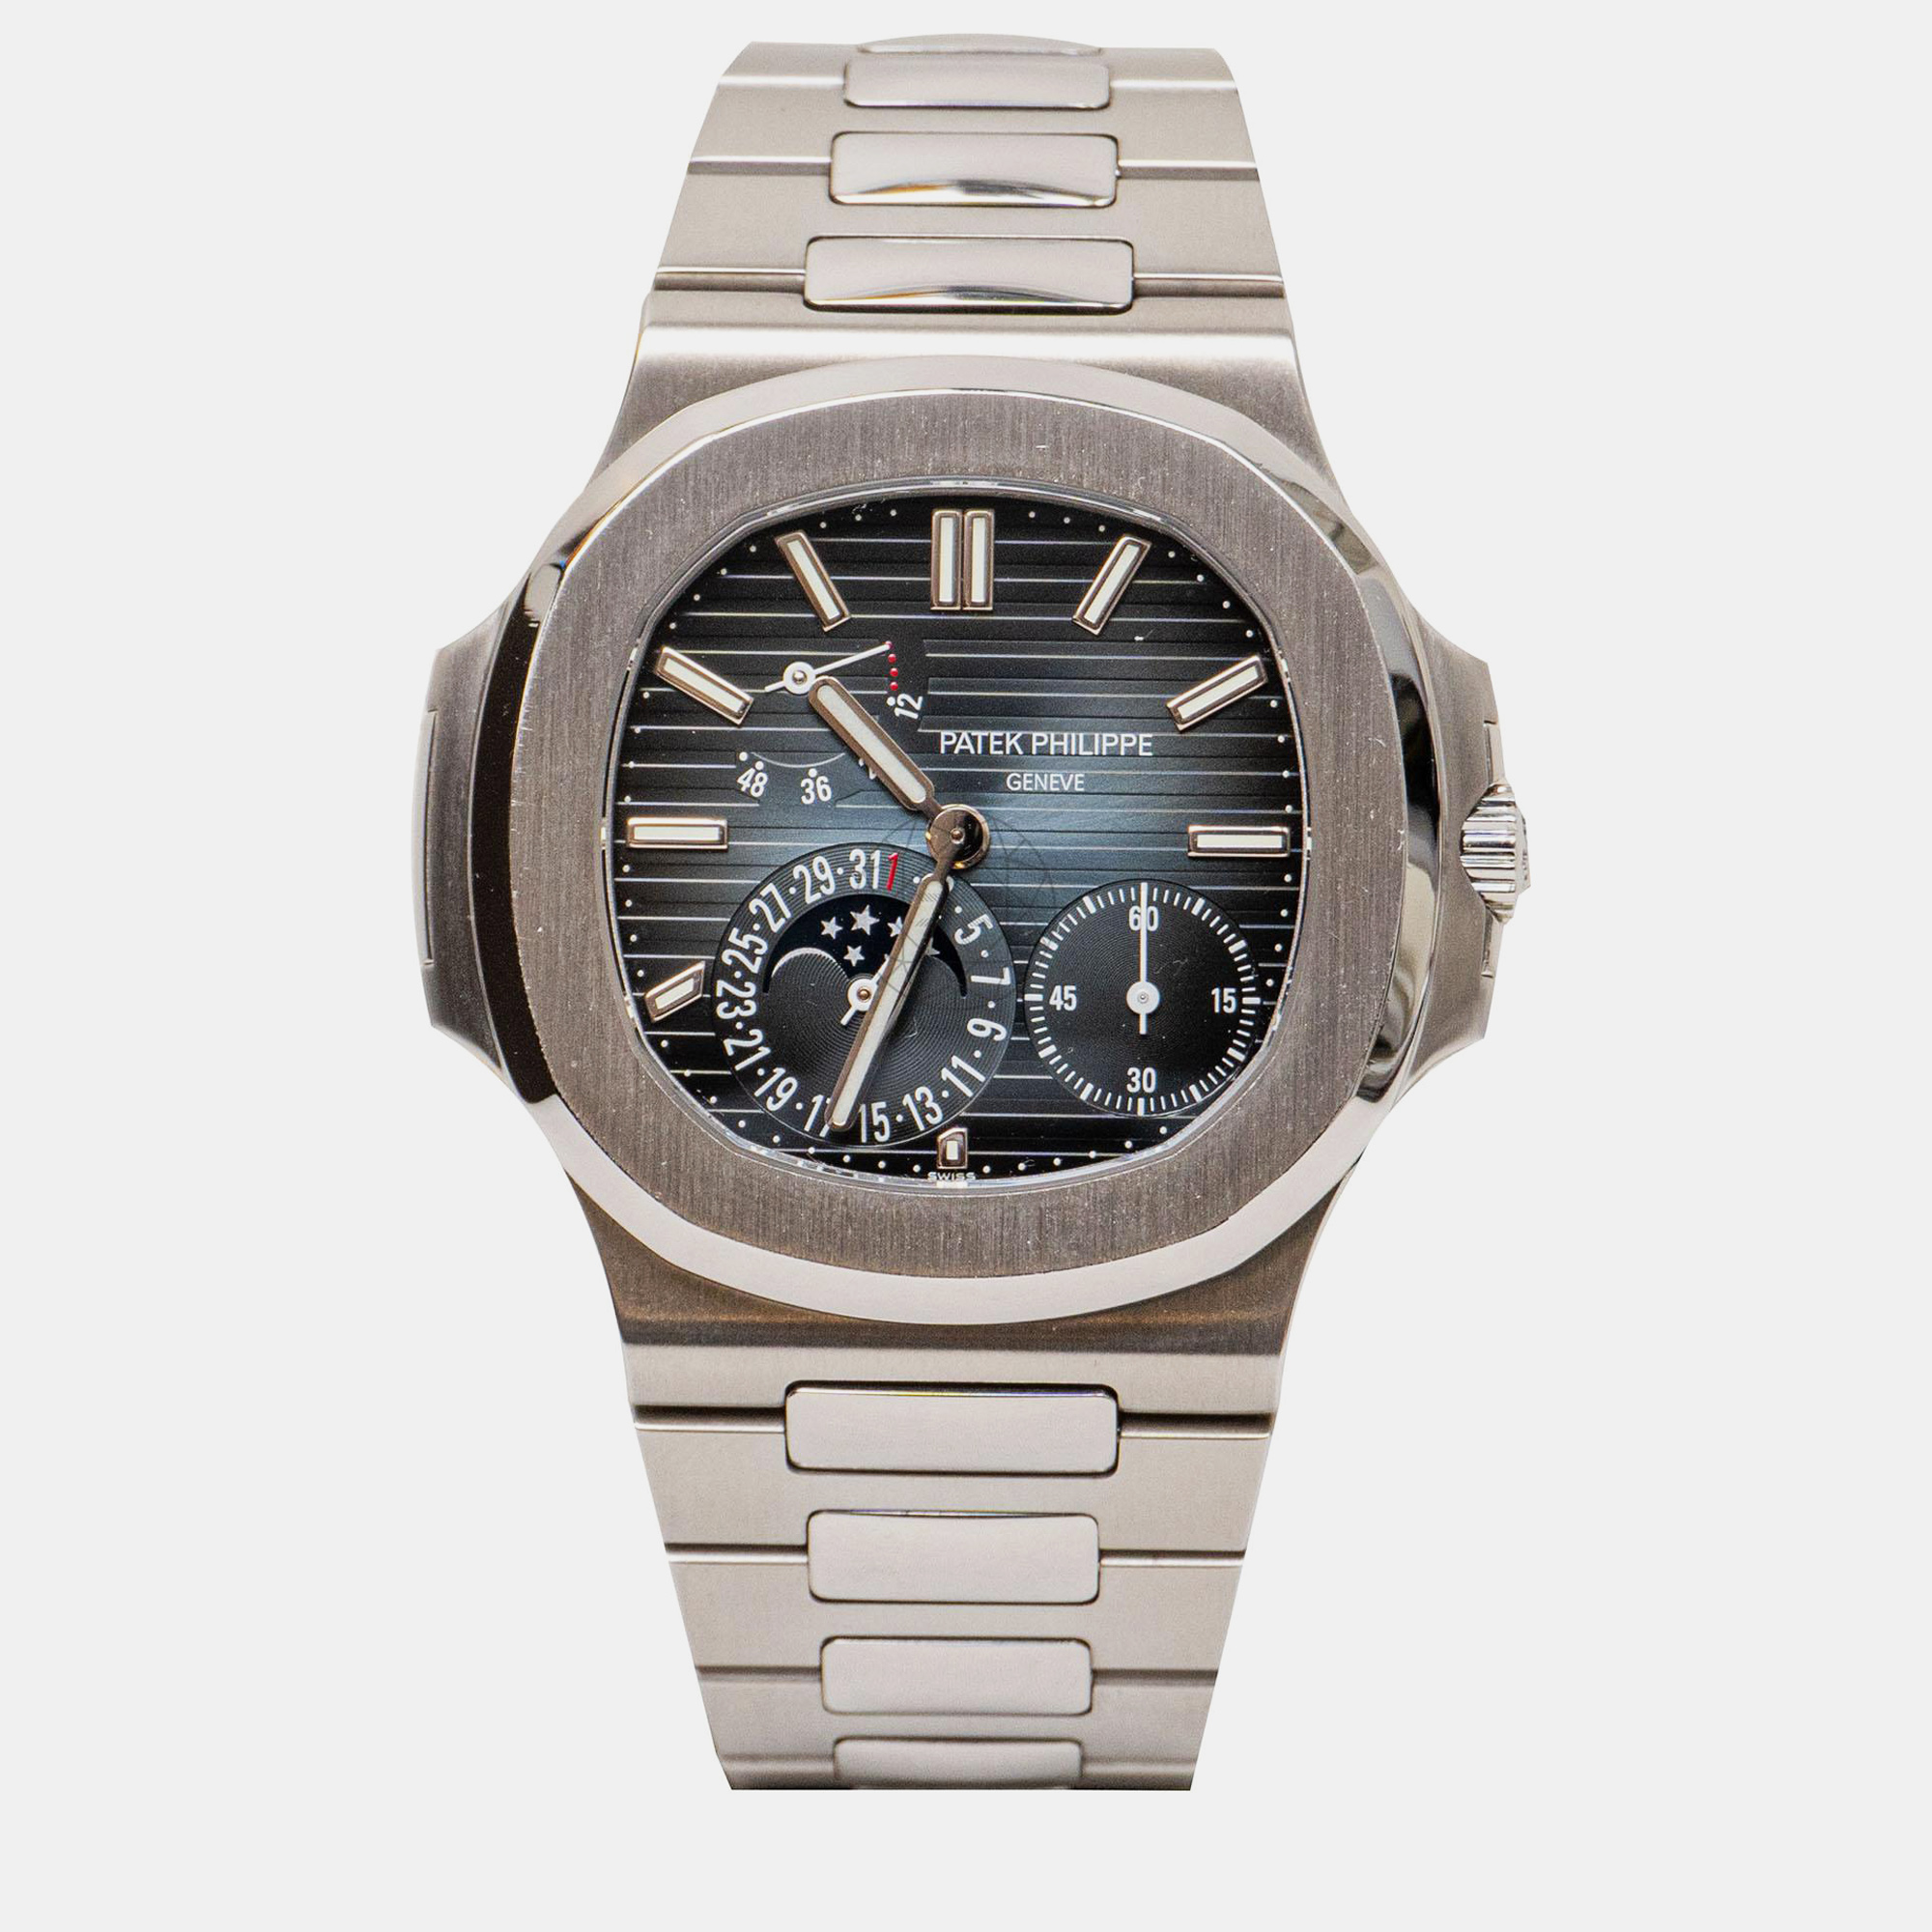 Pre-owned Patek Philippe Nautilus Moon Phase Ss Watch 5712/1a Watch 40 Mm In Silver